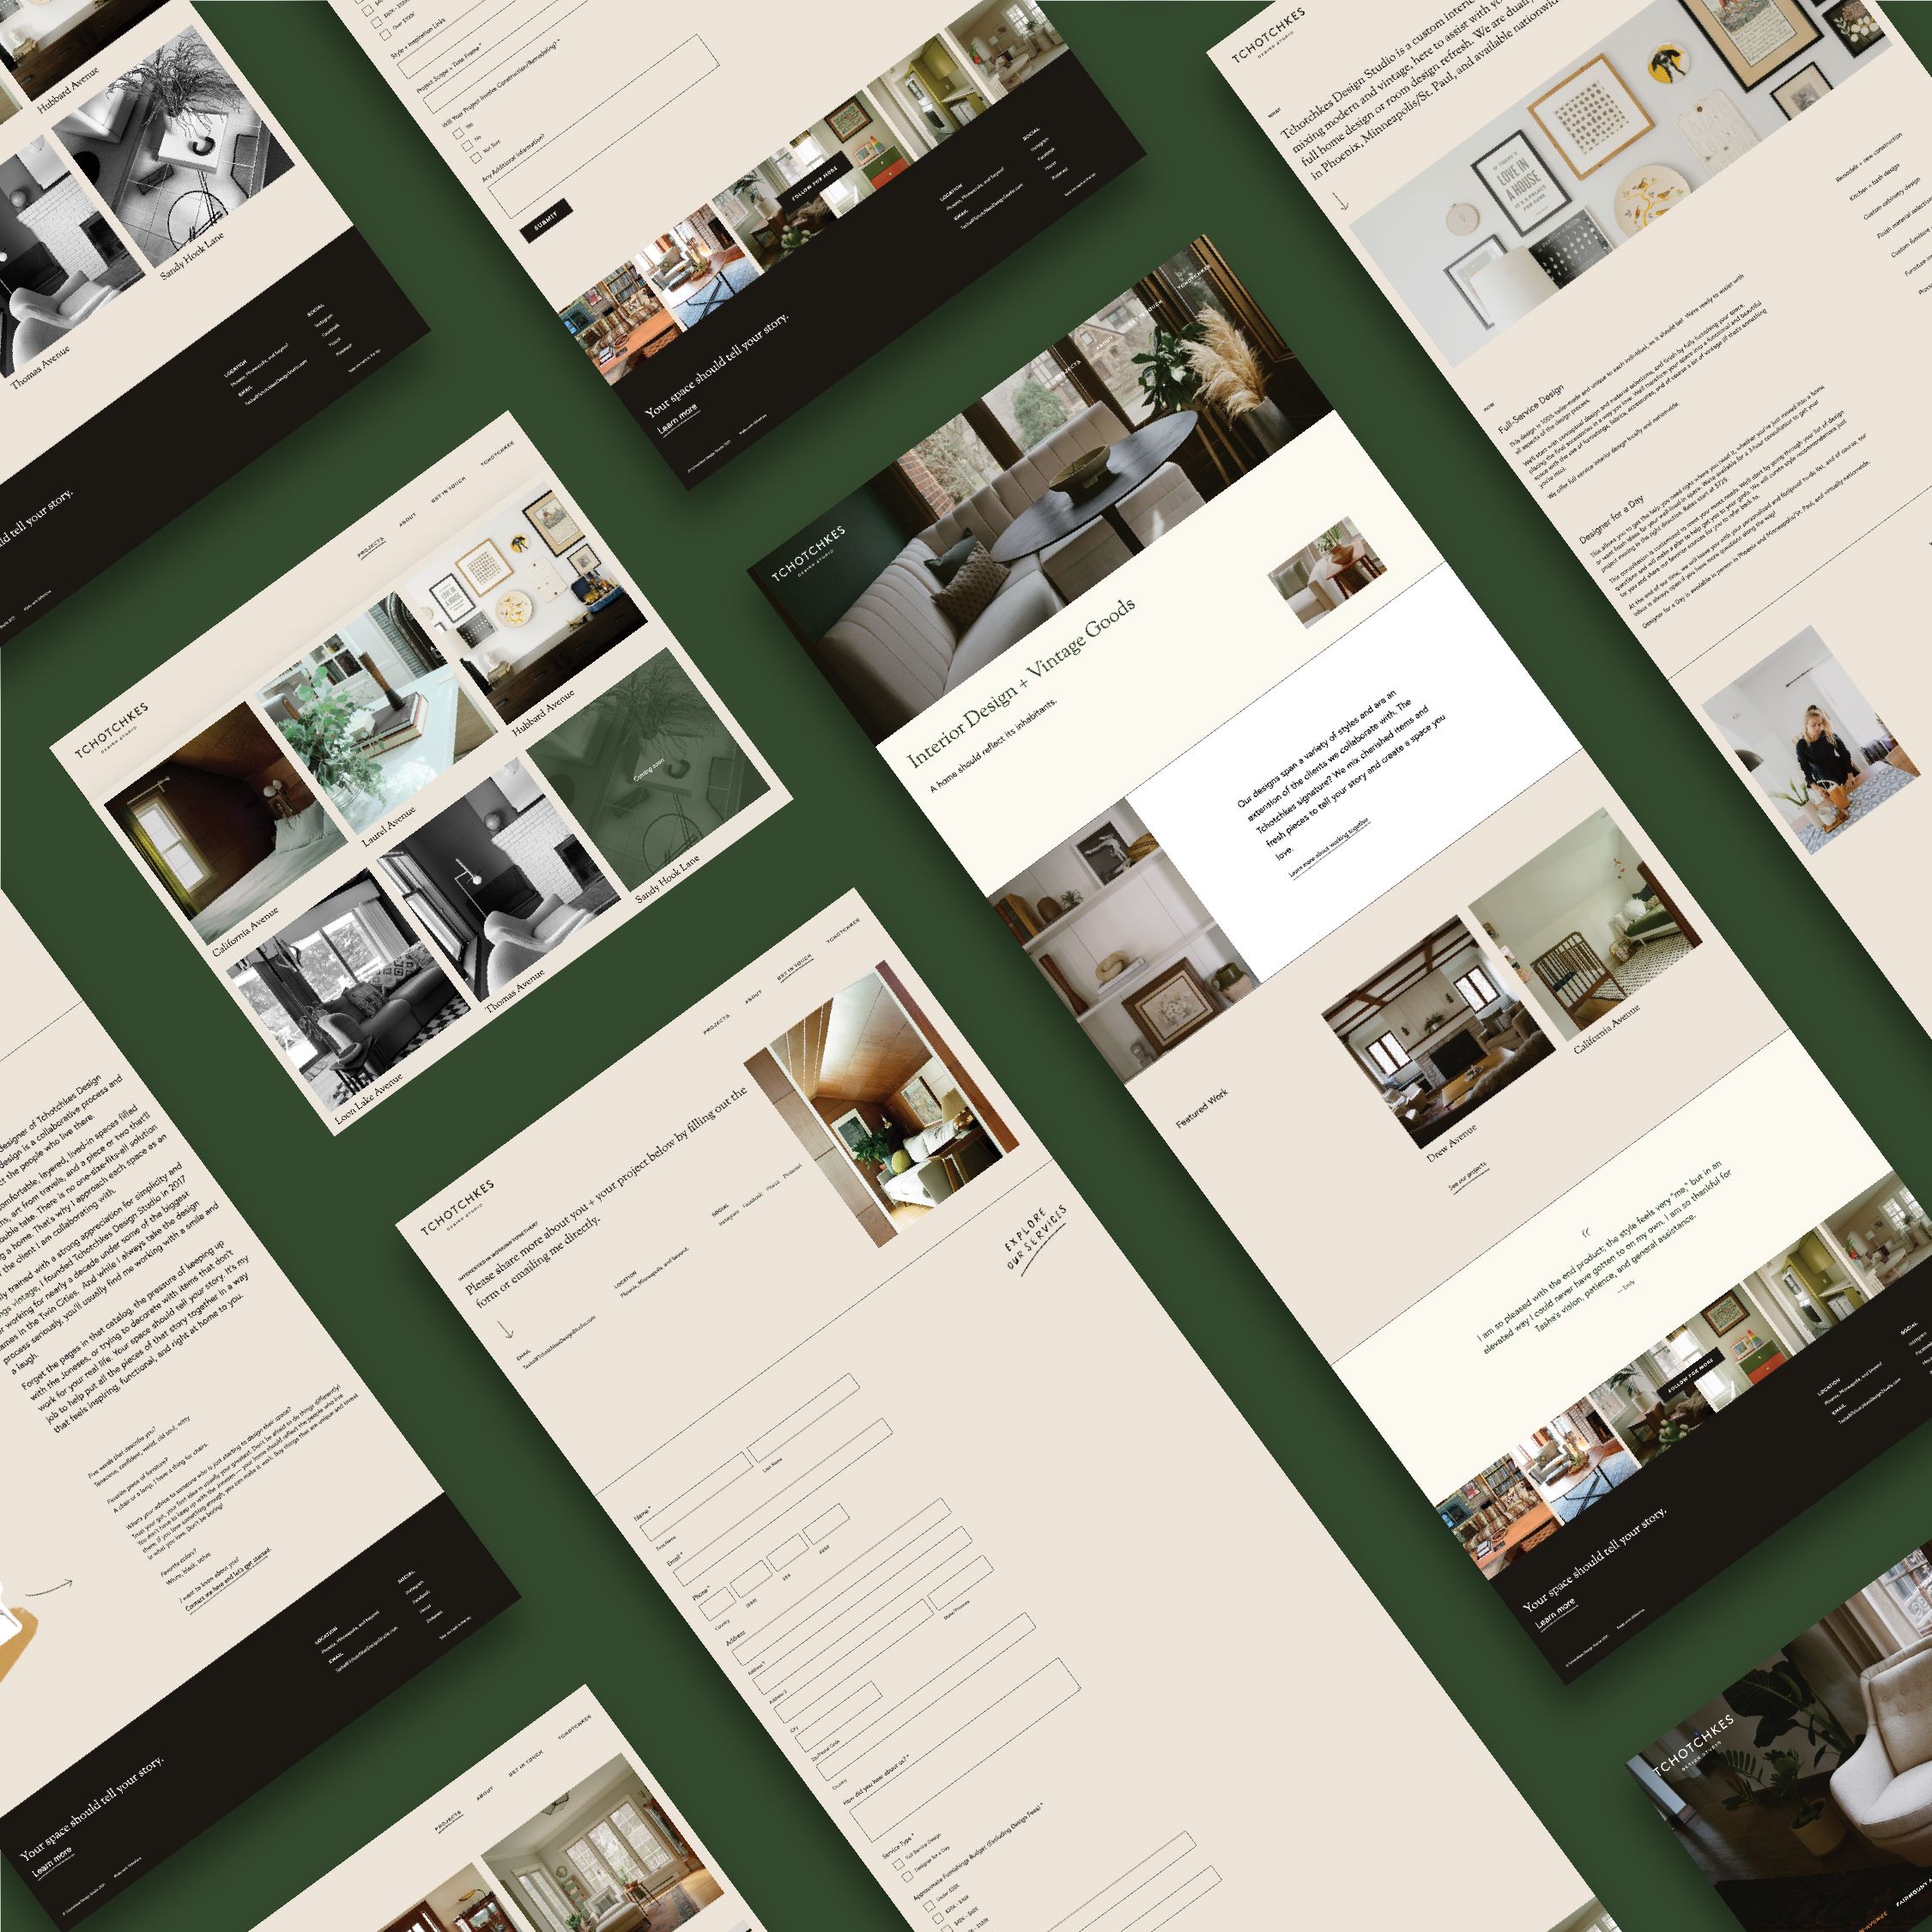 Diagonal layout of multiple webpage design for Tchotchkes on a green background including: home page design, website contact page, work image galleries, and an about the owner page